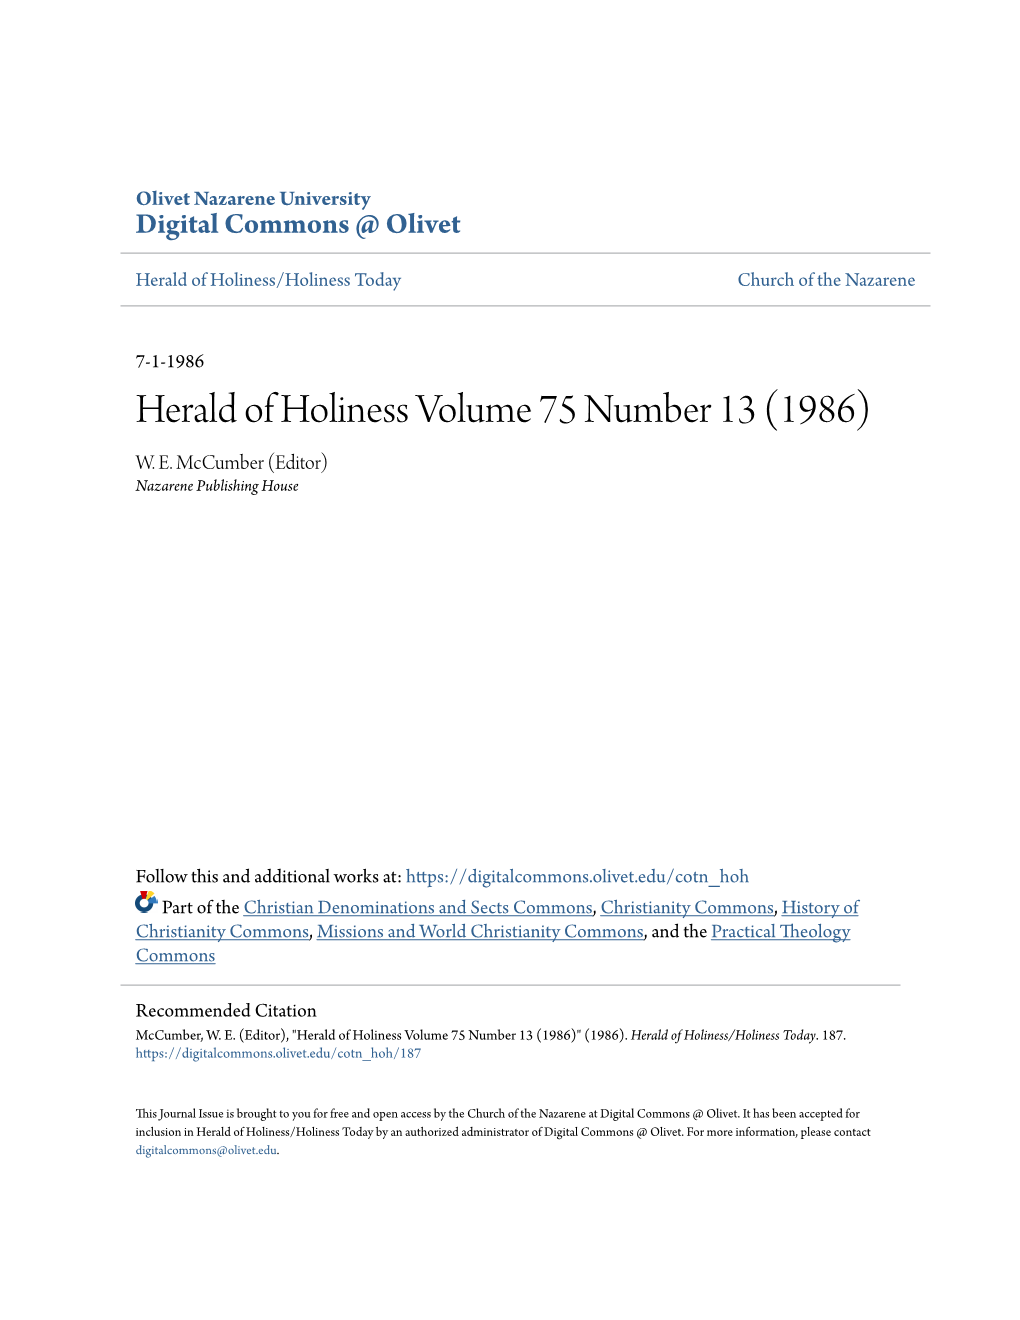 Herald of Holiness Volume 75 Number 13 (1986) W